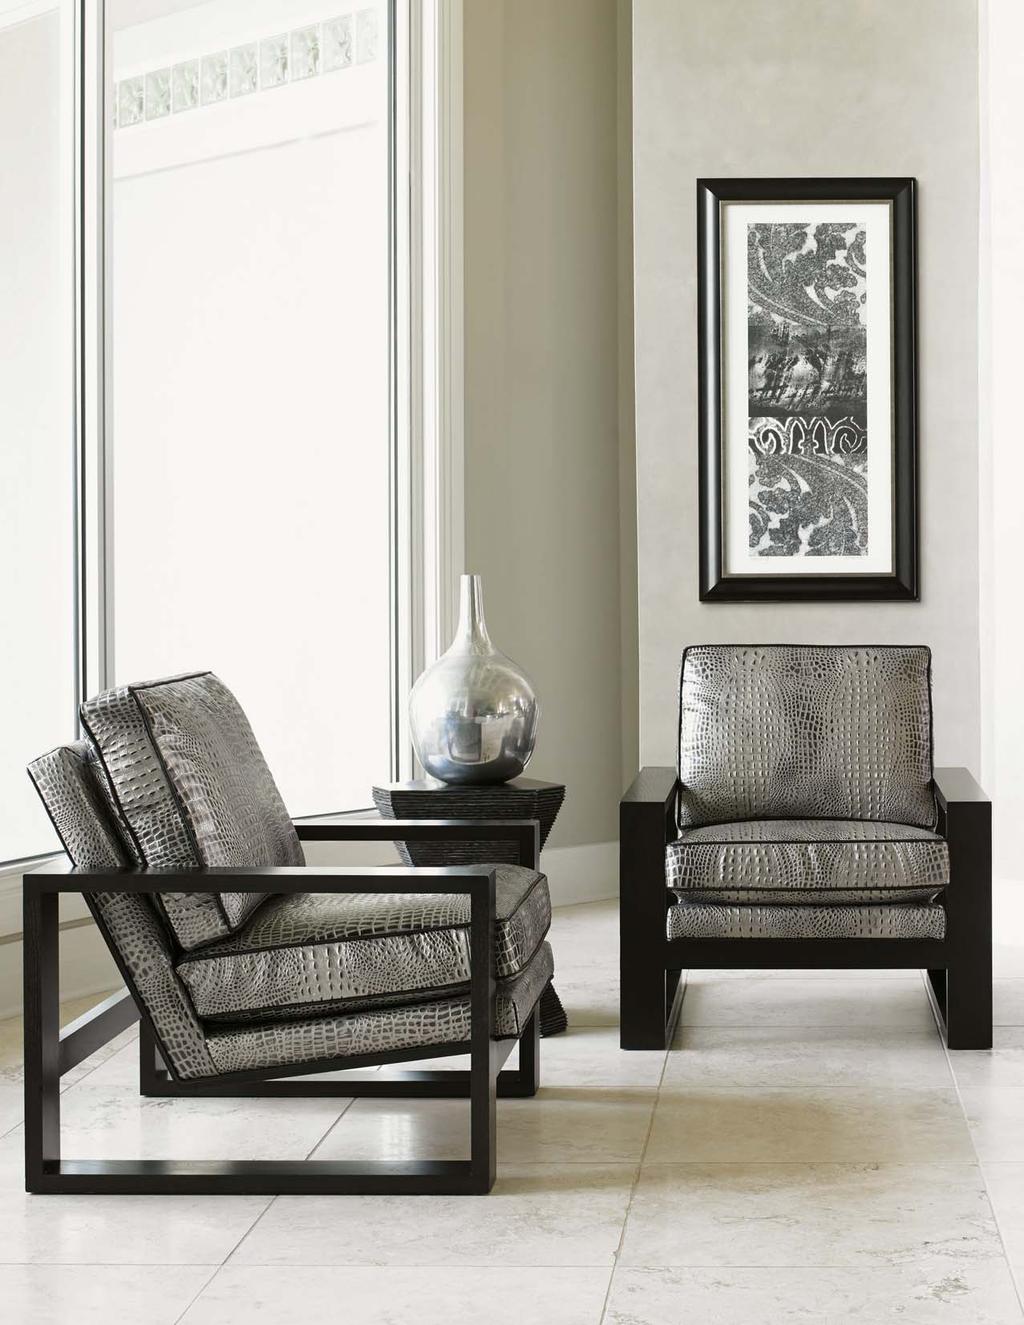 The Axis chair is a classic contemporary profile, as comfortable as it